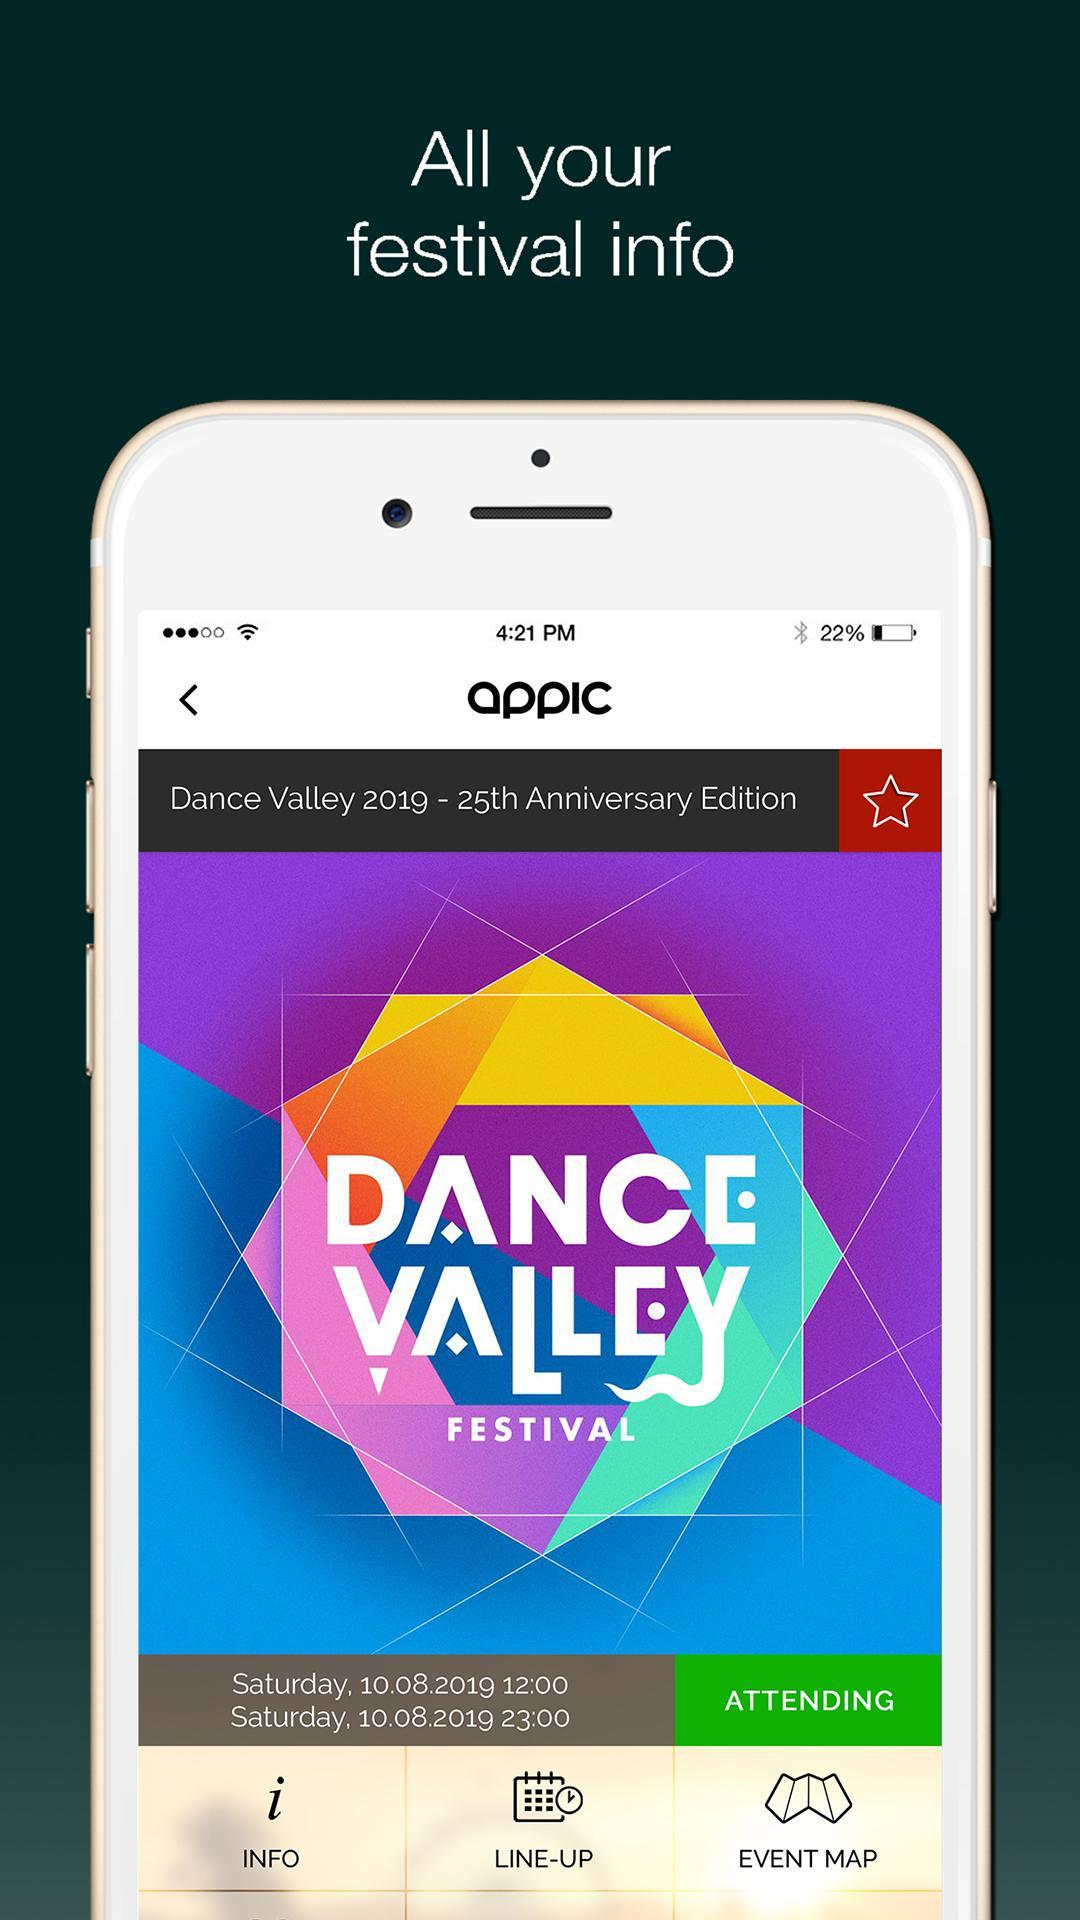 Appic - Events & Festival info